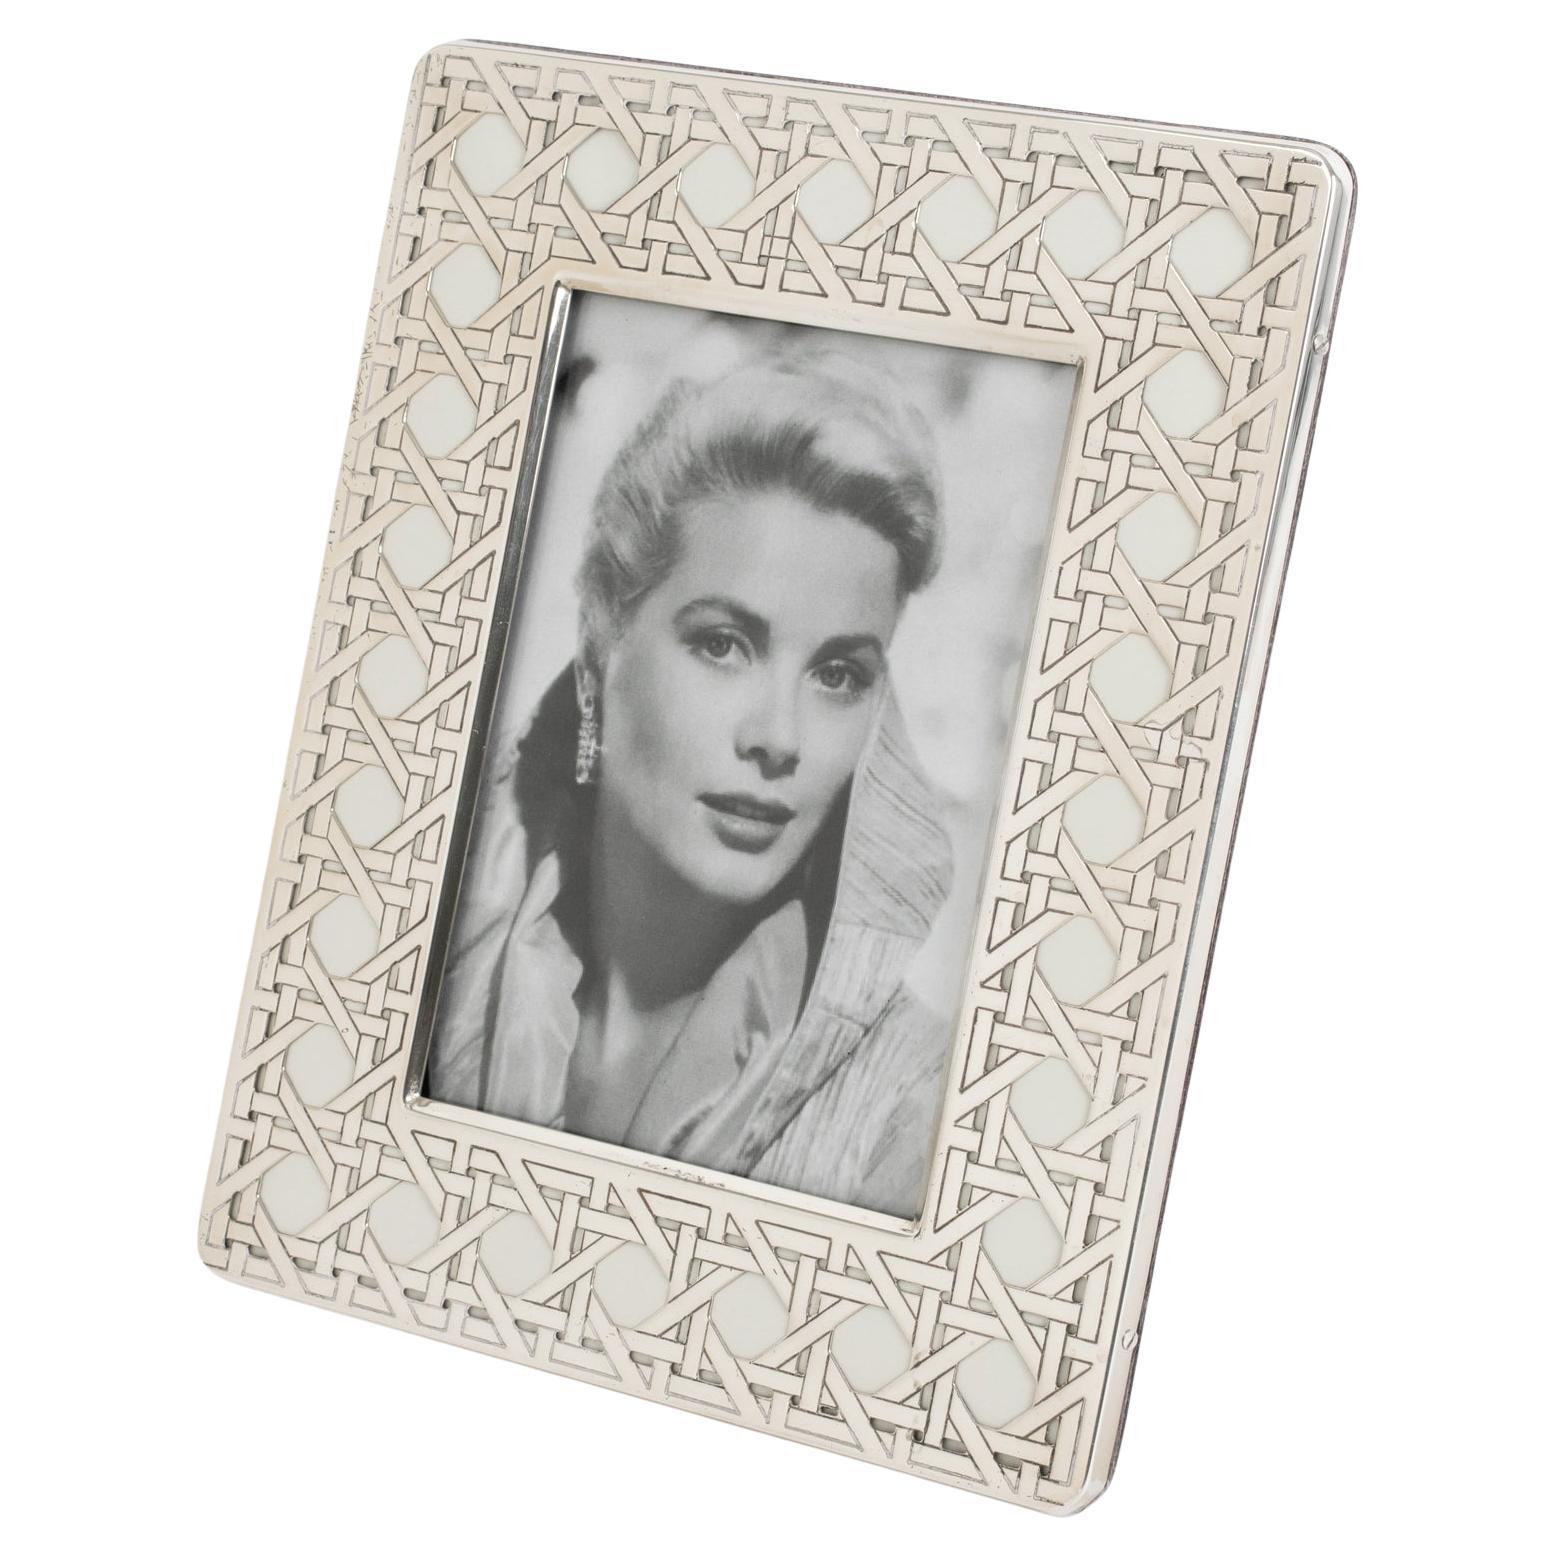 Christian Dior Sterling Silver Picture Frame with Cane-work Wicker Style Decor